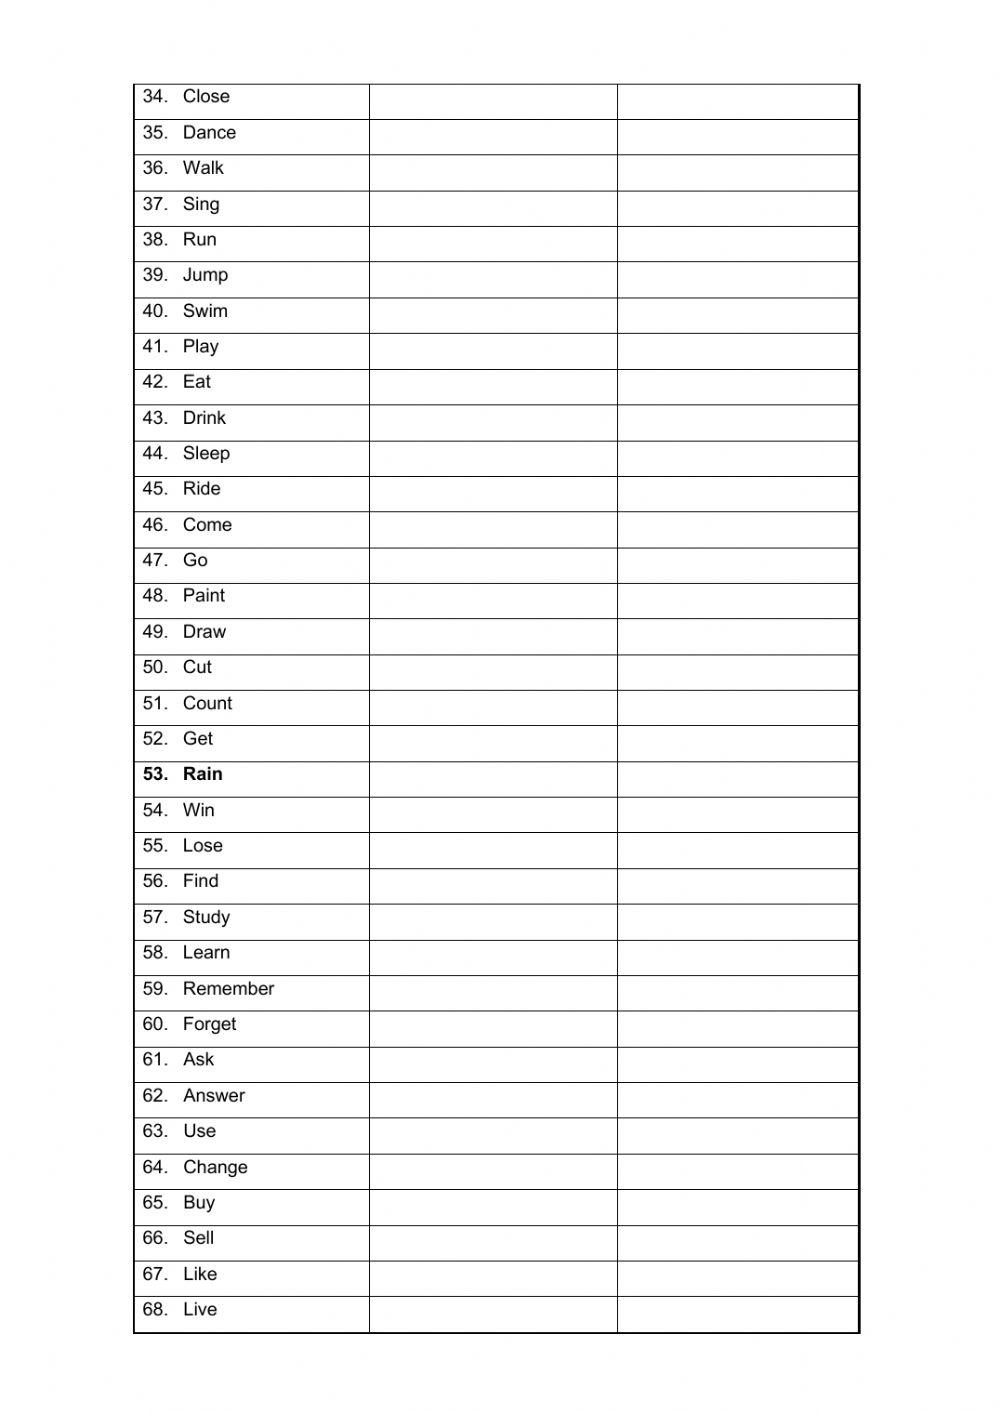 Verb list infinitive, past, meaning